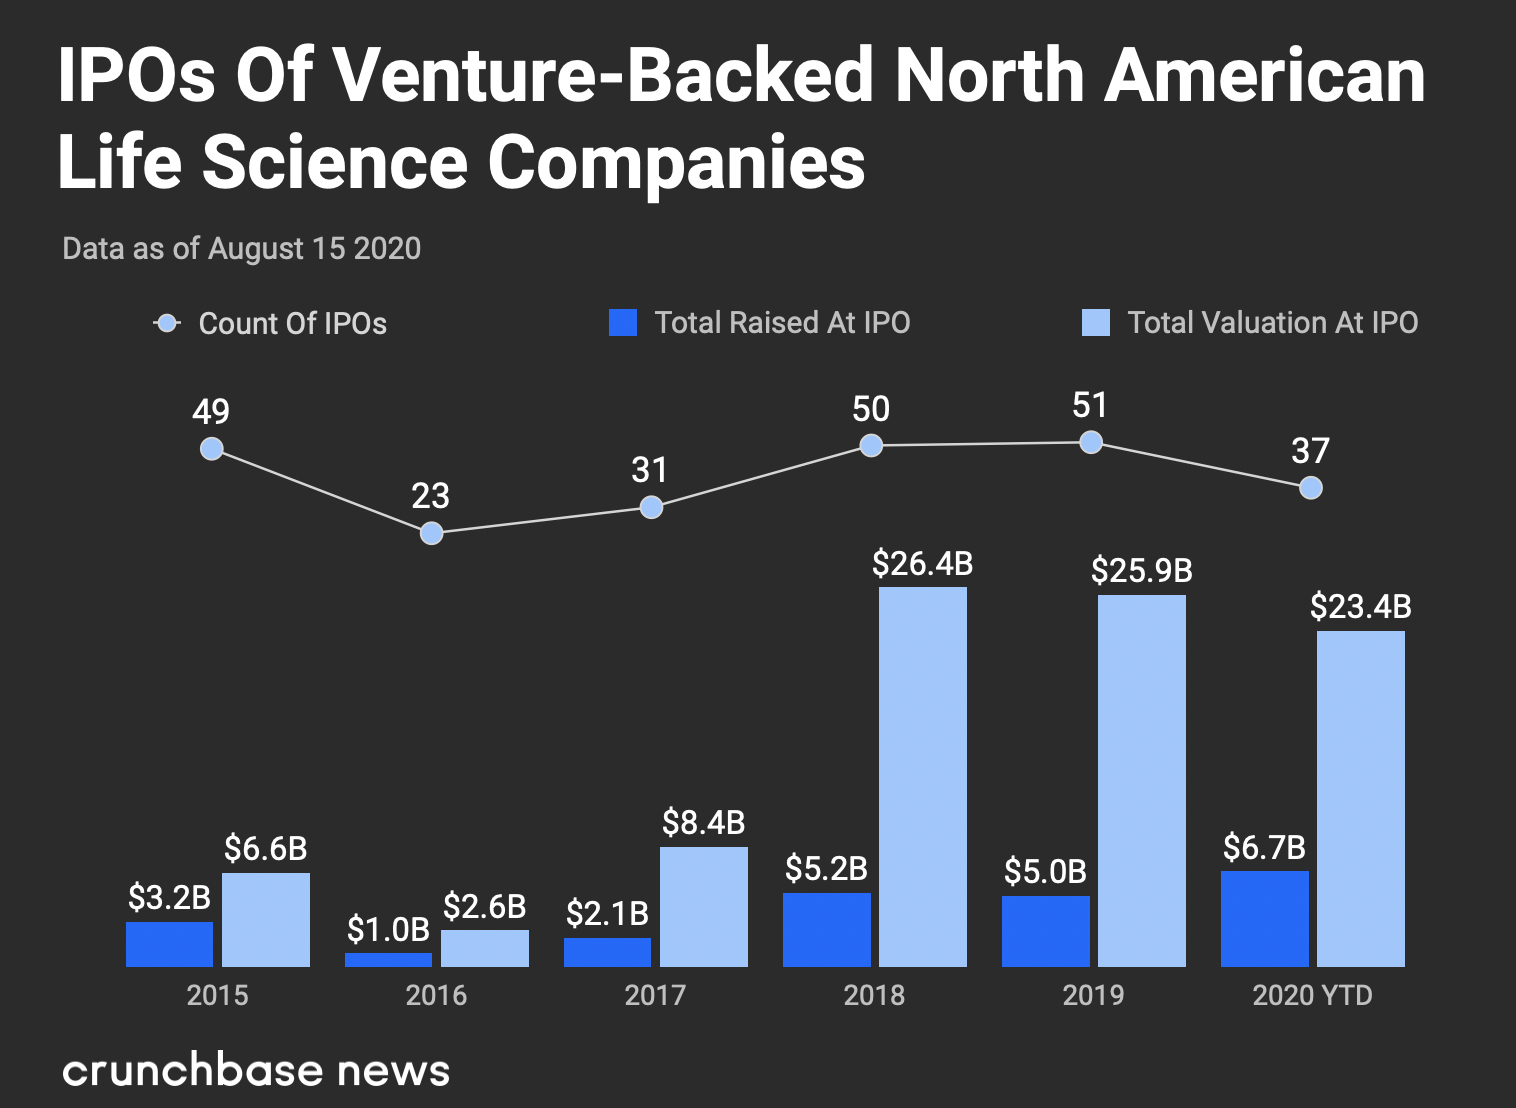 IPOs of Venture-Backed North American Life Science Companies